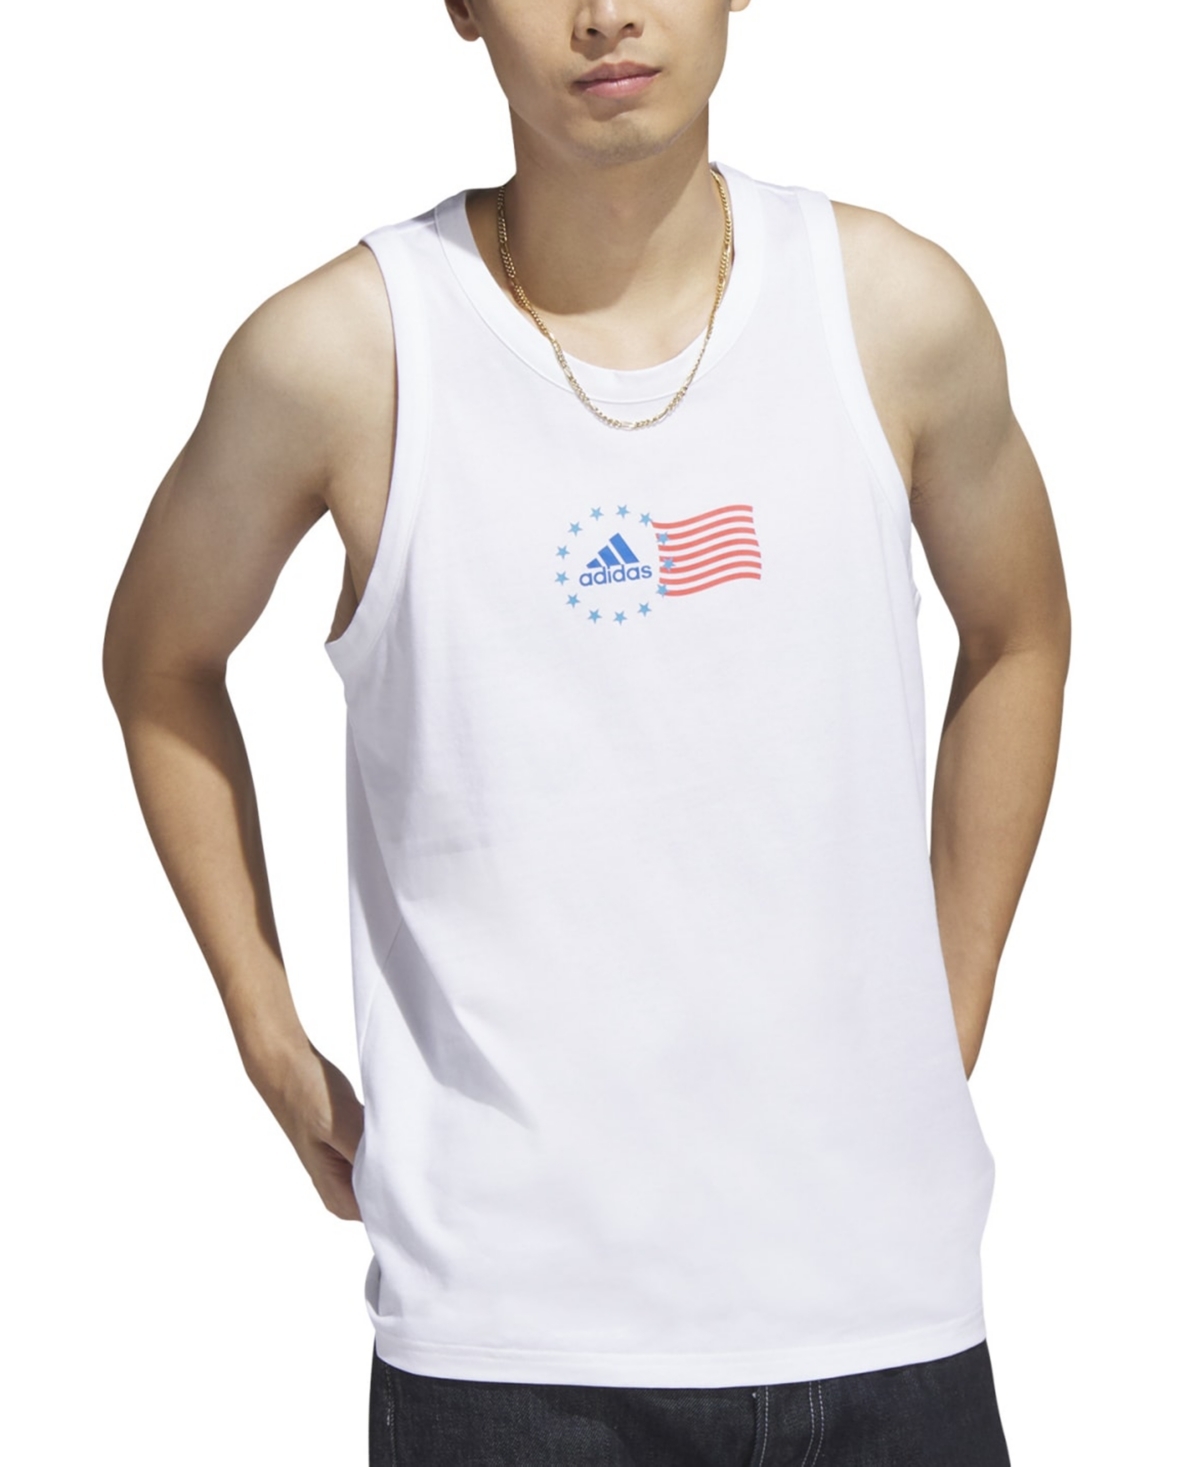 Primary image for adidas Men's American Flag Tank - White-XL